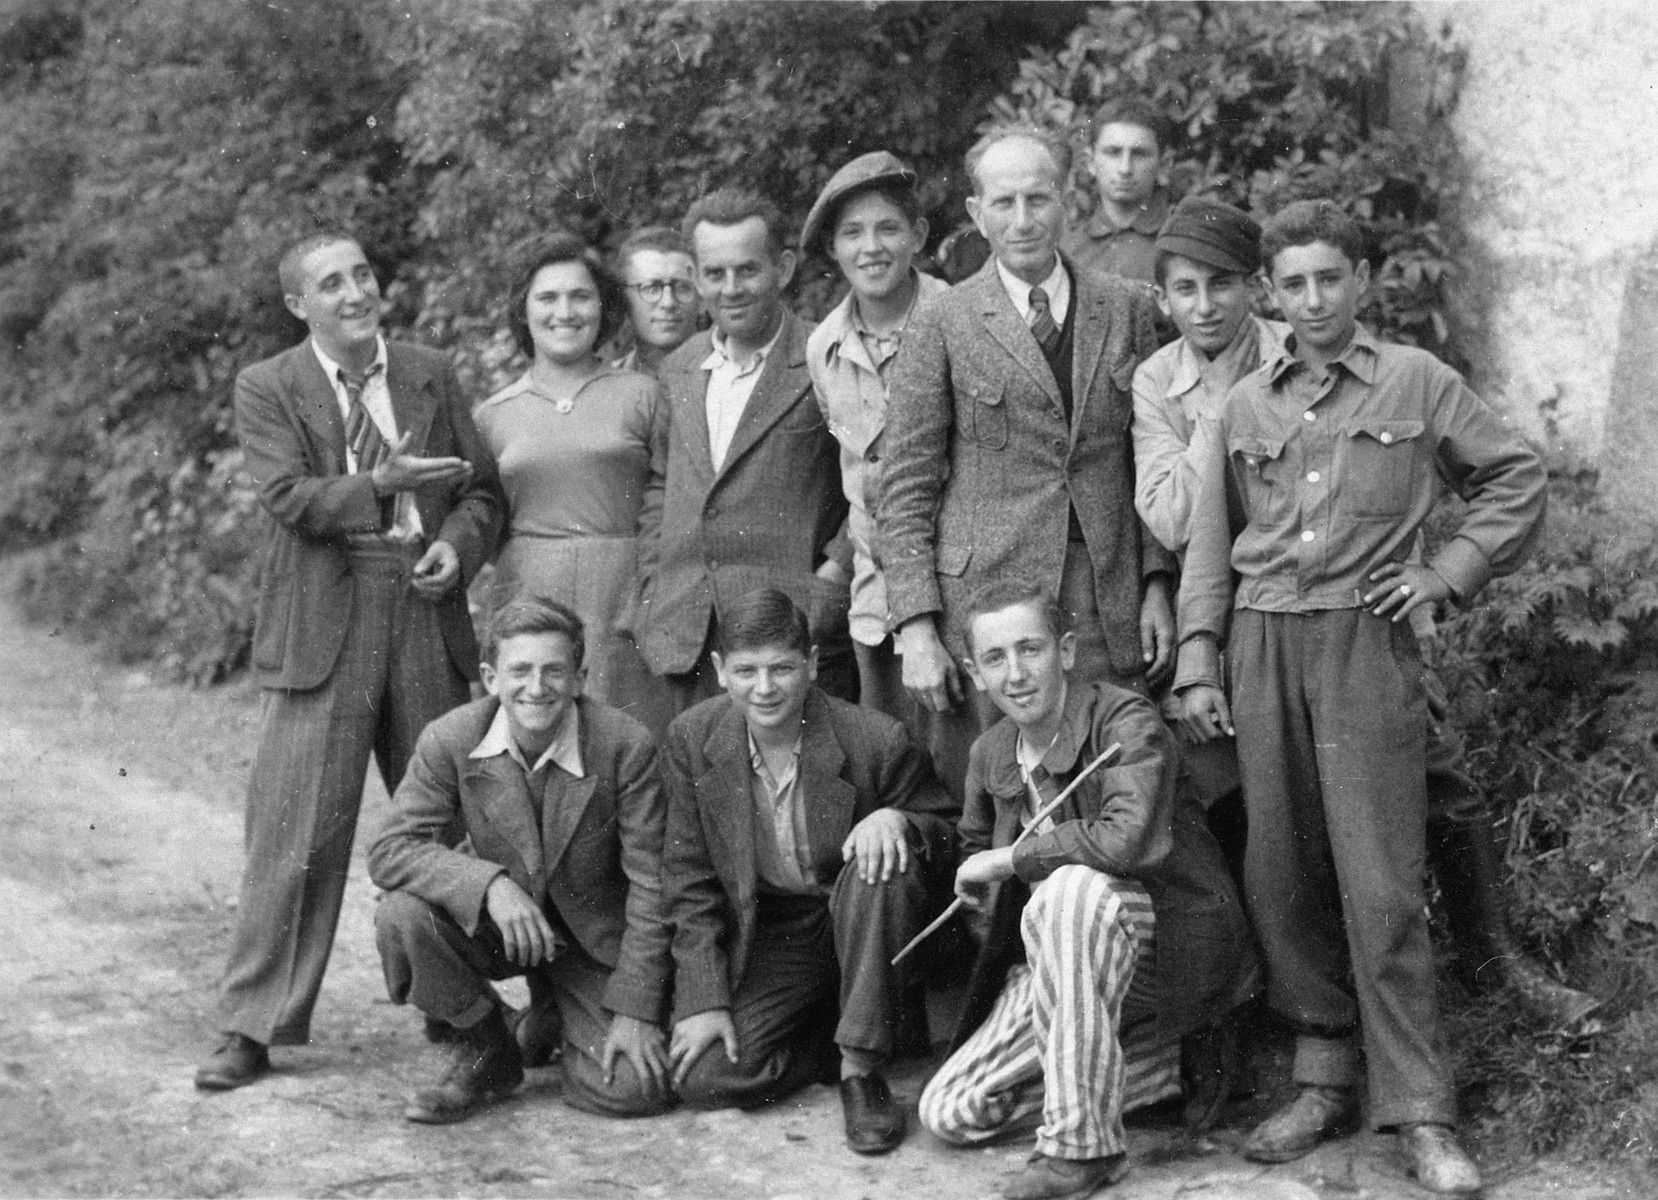 Group portrait of survivors of a Kaufering sub-camp one month after liberation.

Among those pictured are Uriel Hanoch (standing fifth from the left).